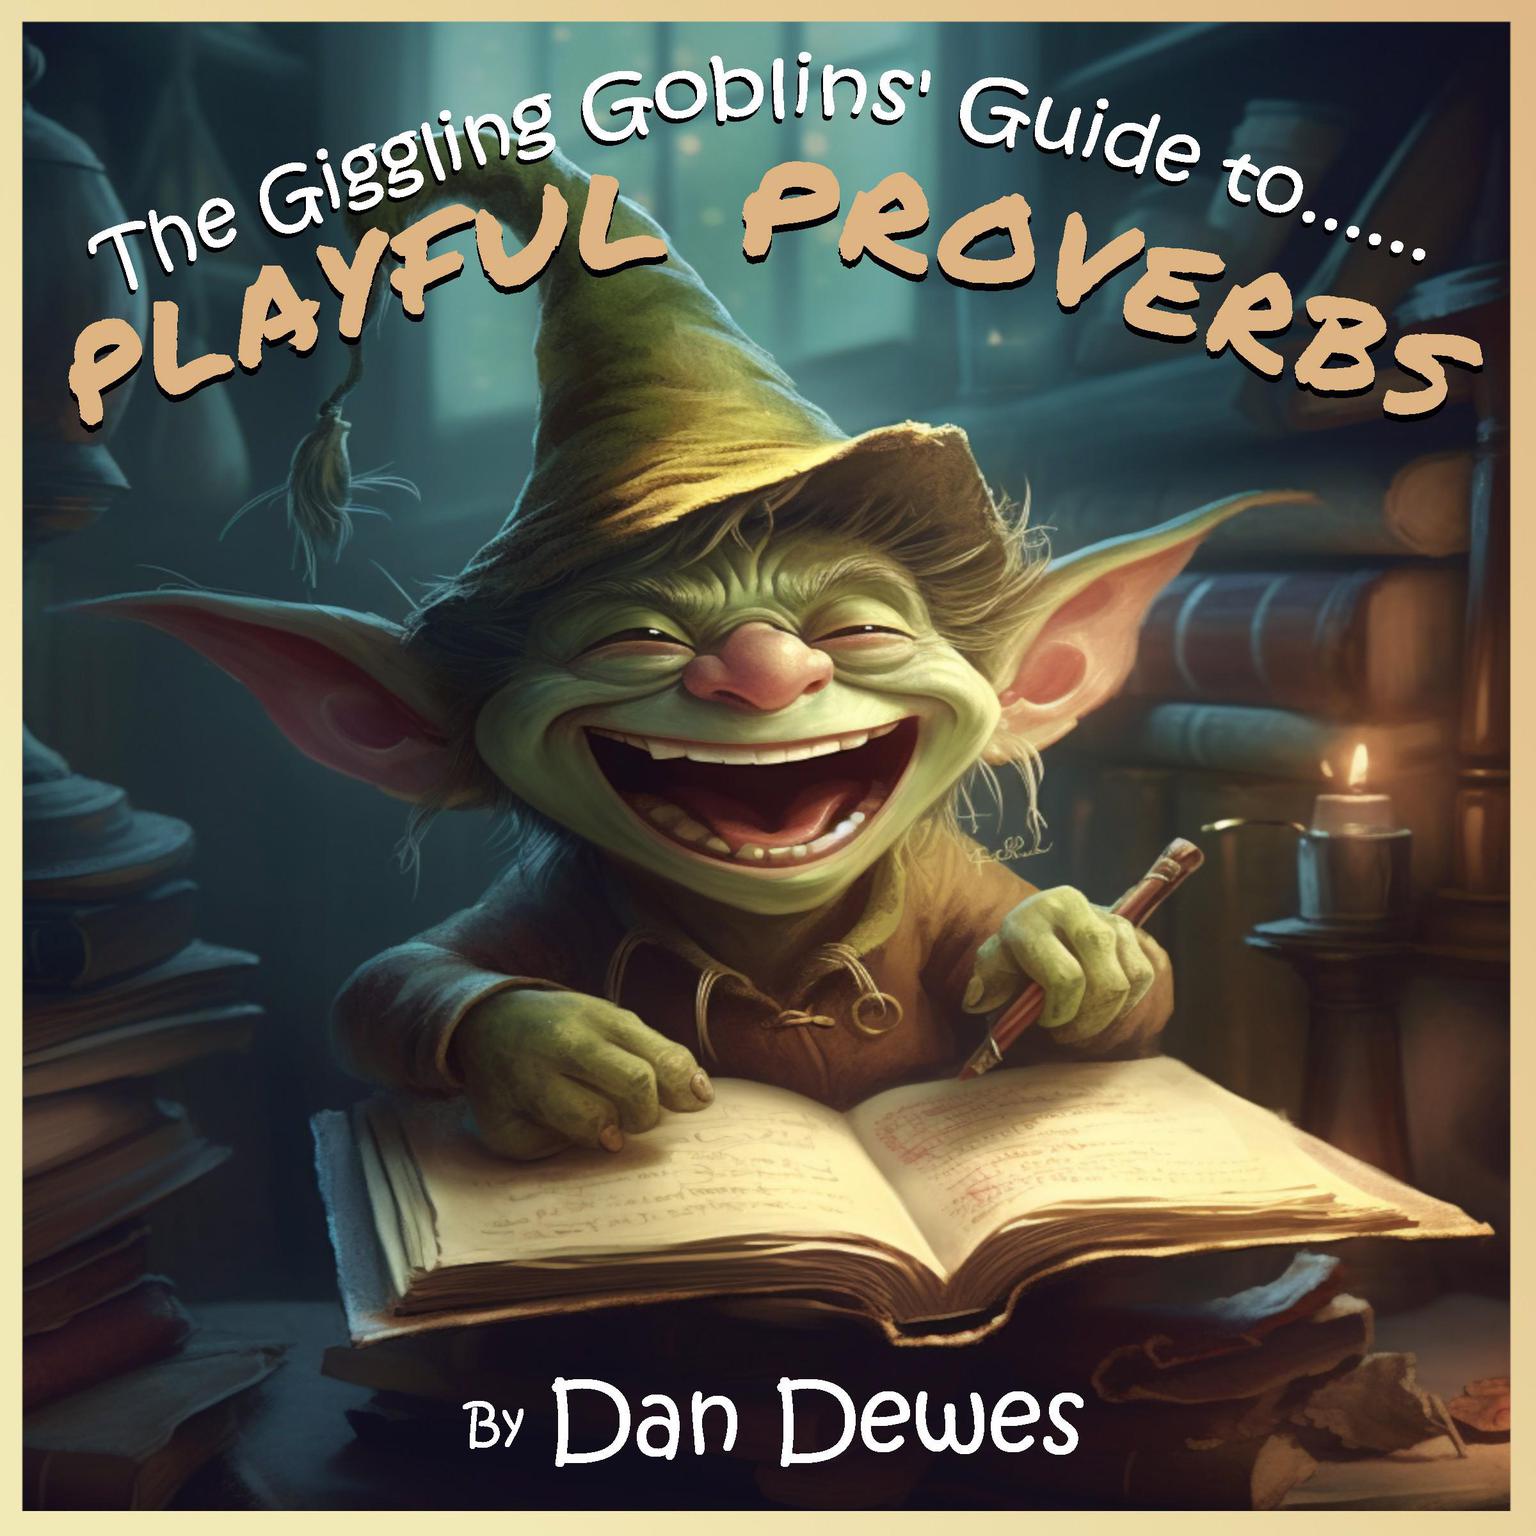 The Giggling Goblins Guide to Playful Proverbs Audiobook, by Dan Dewes